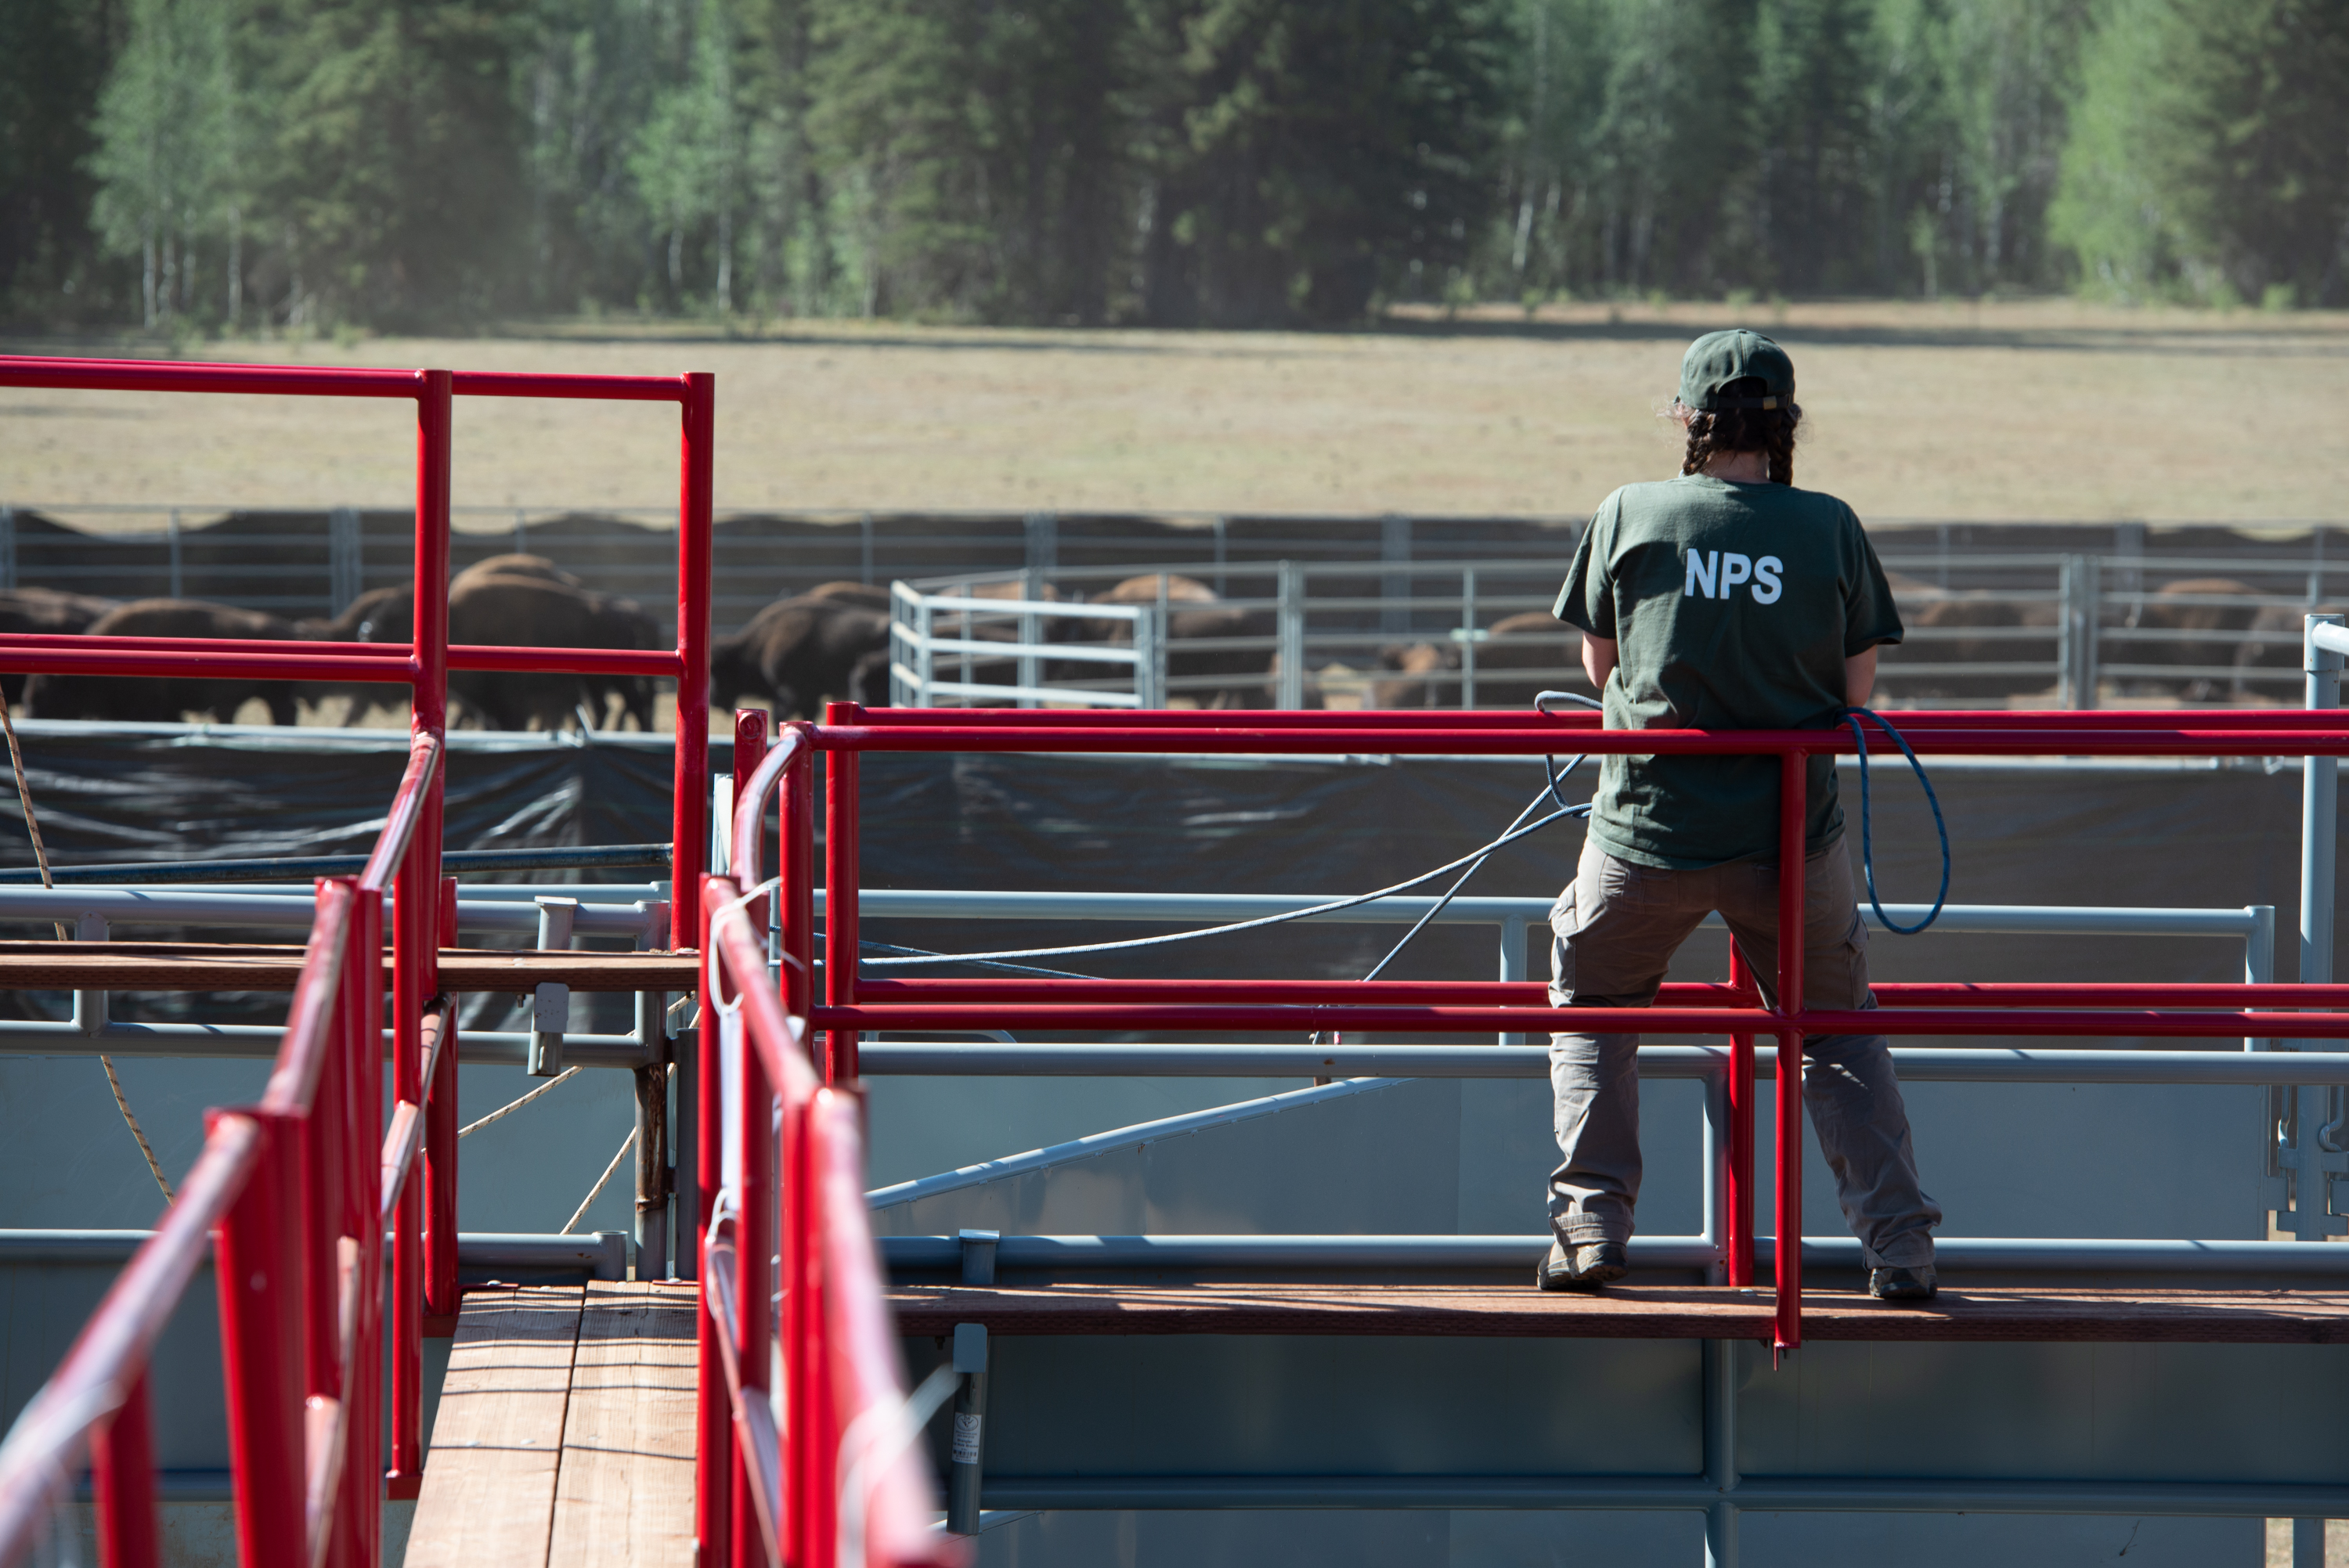 A National Park Service wildlife biologist overlooks the bison corral operation.